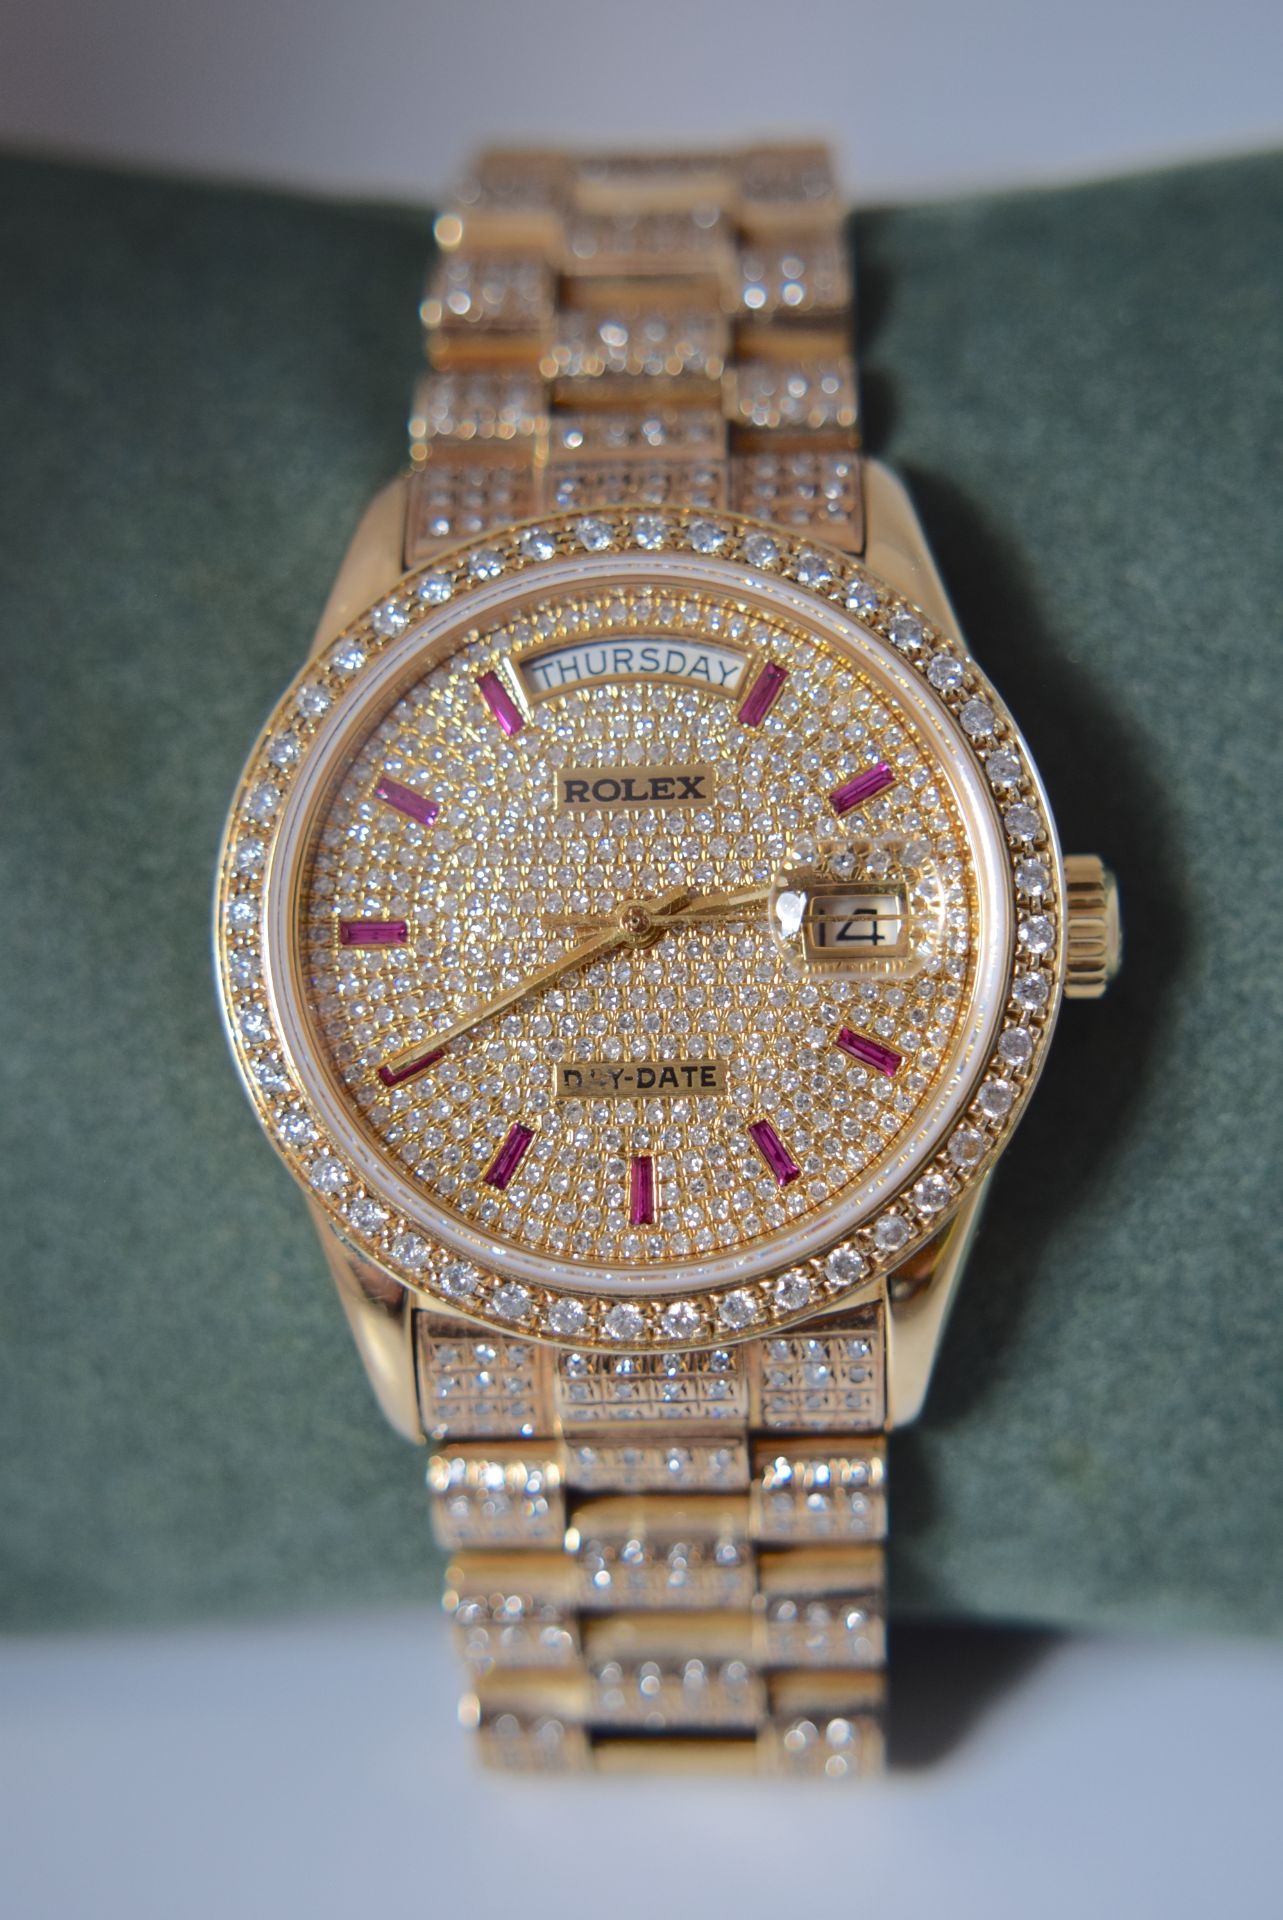 ROLEX DAY DATE 18K REF. 18038 DIAMOND-SET WITH RUBIES (BAGUETTES) - QUICK-SETTING - Image 2 of 12